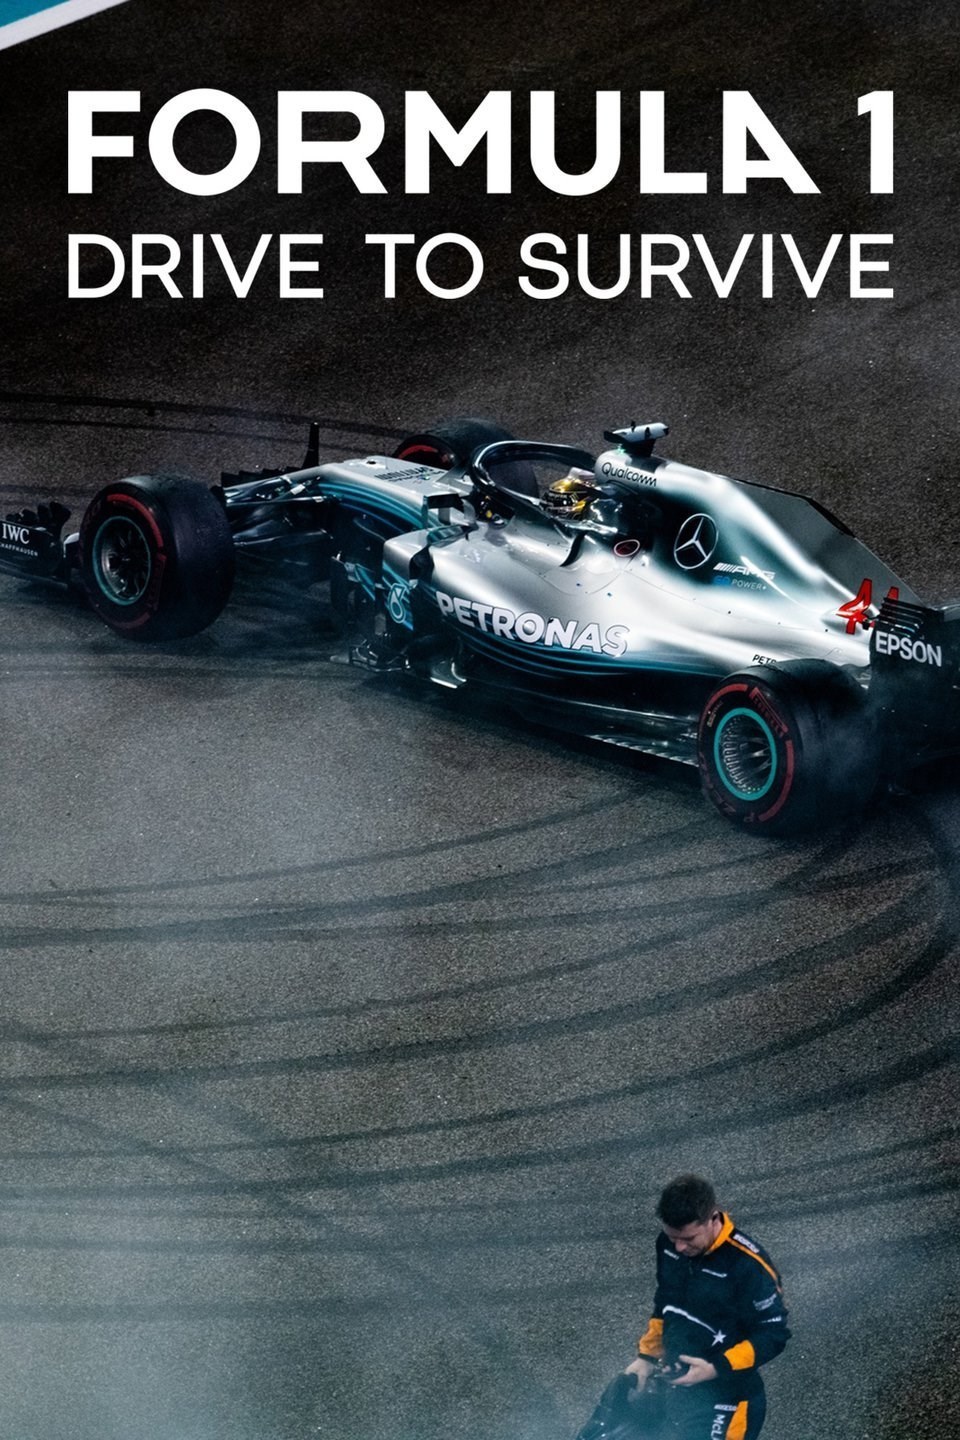 [Fshare] - Formula 1 Drive to Survive S02 1080p NF WEB-DL DDP 5.1 x264 ...